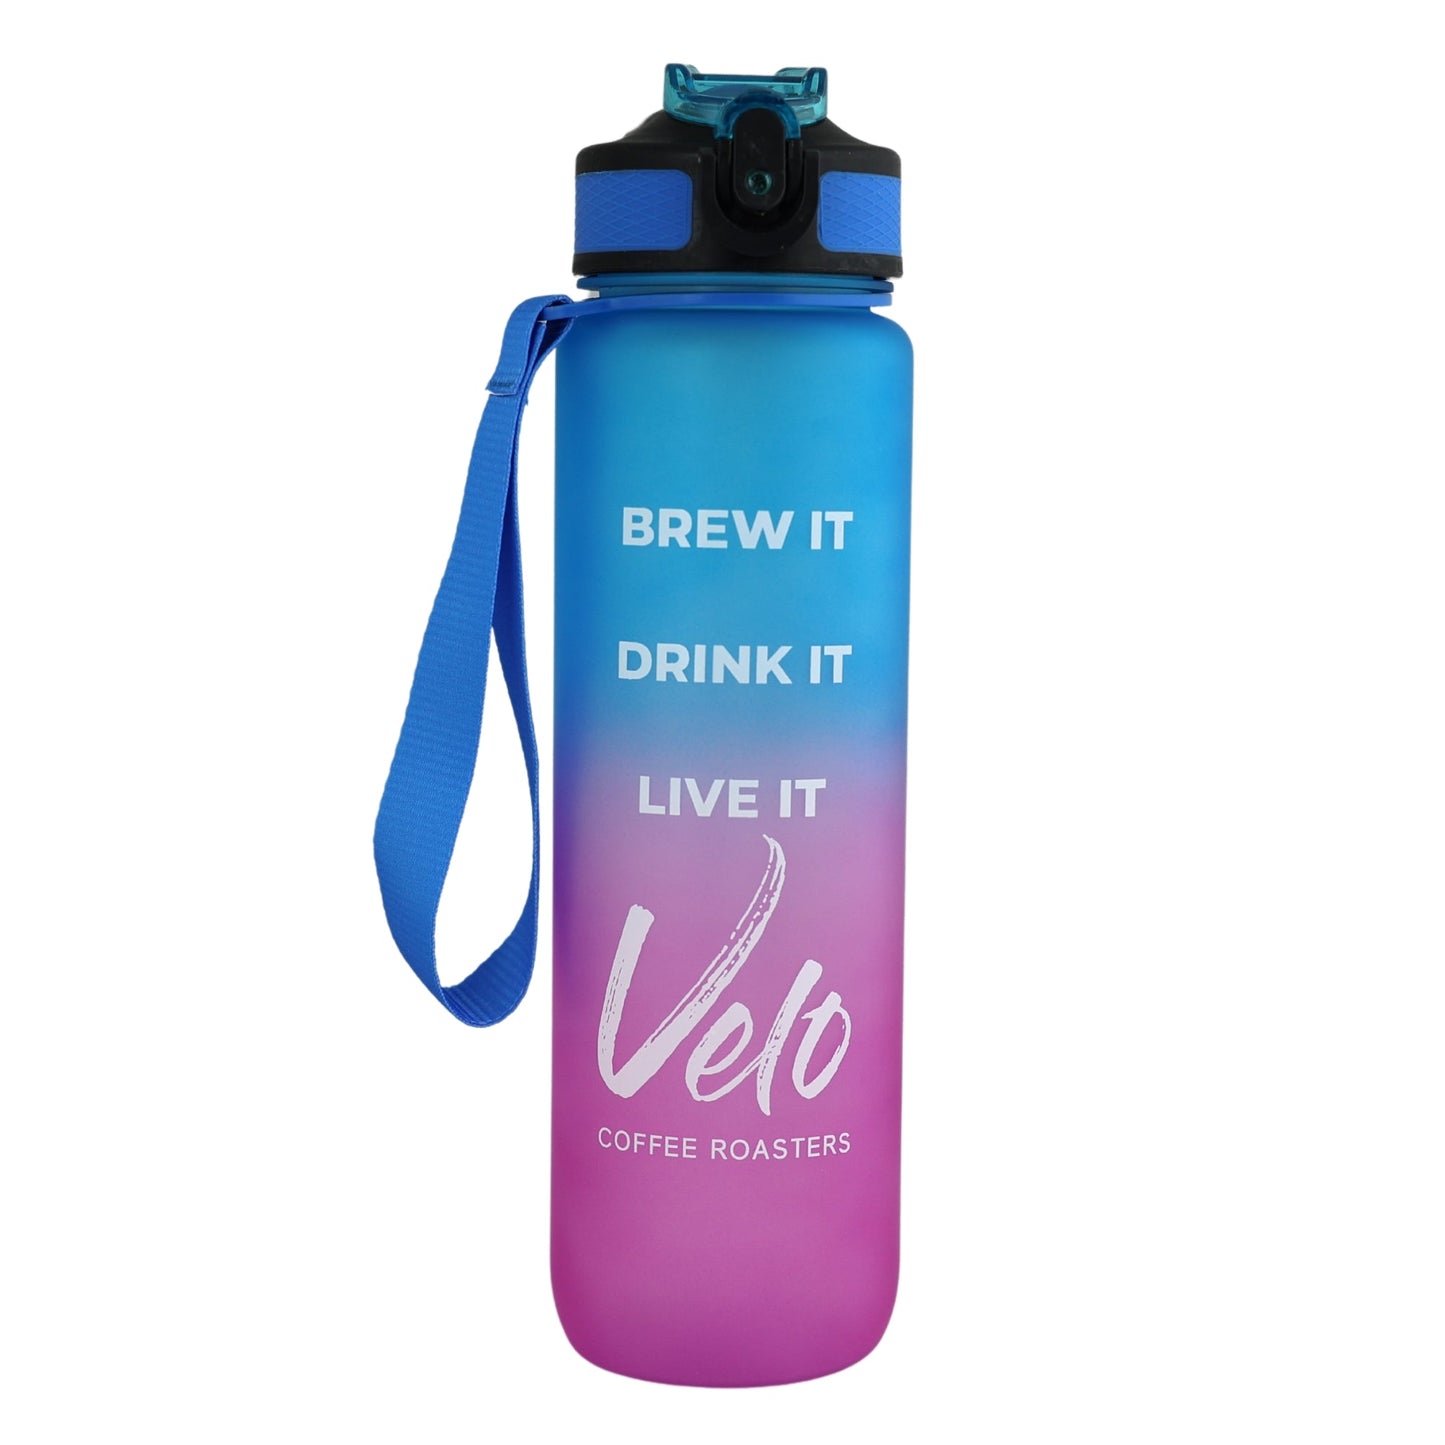 Load image into Gallery viewer, Velo Coffee Roasters Time-marked Water Bottle - 32oz - Velo Coffee Roasters
